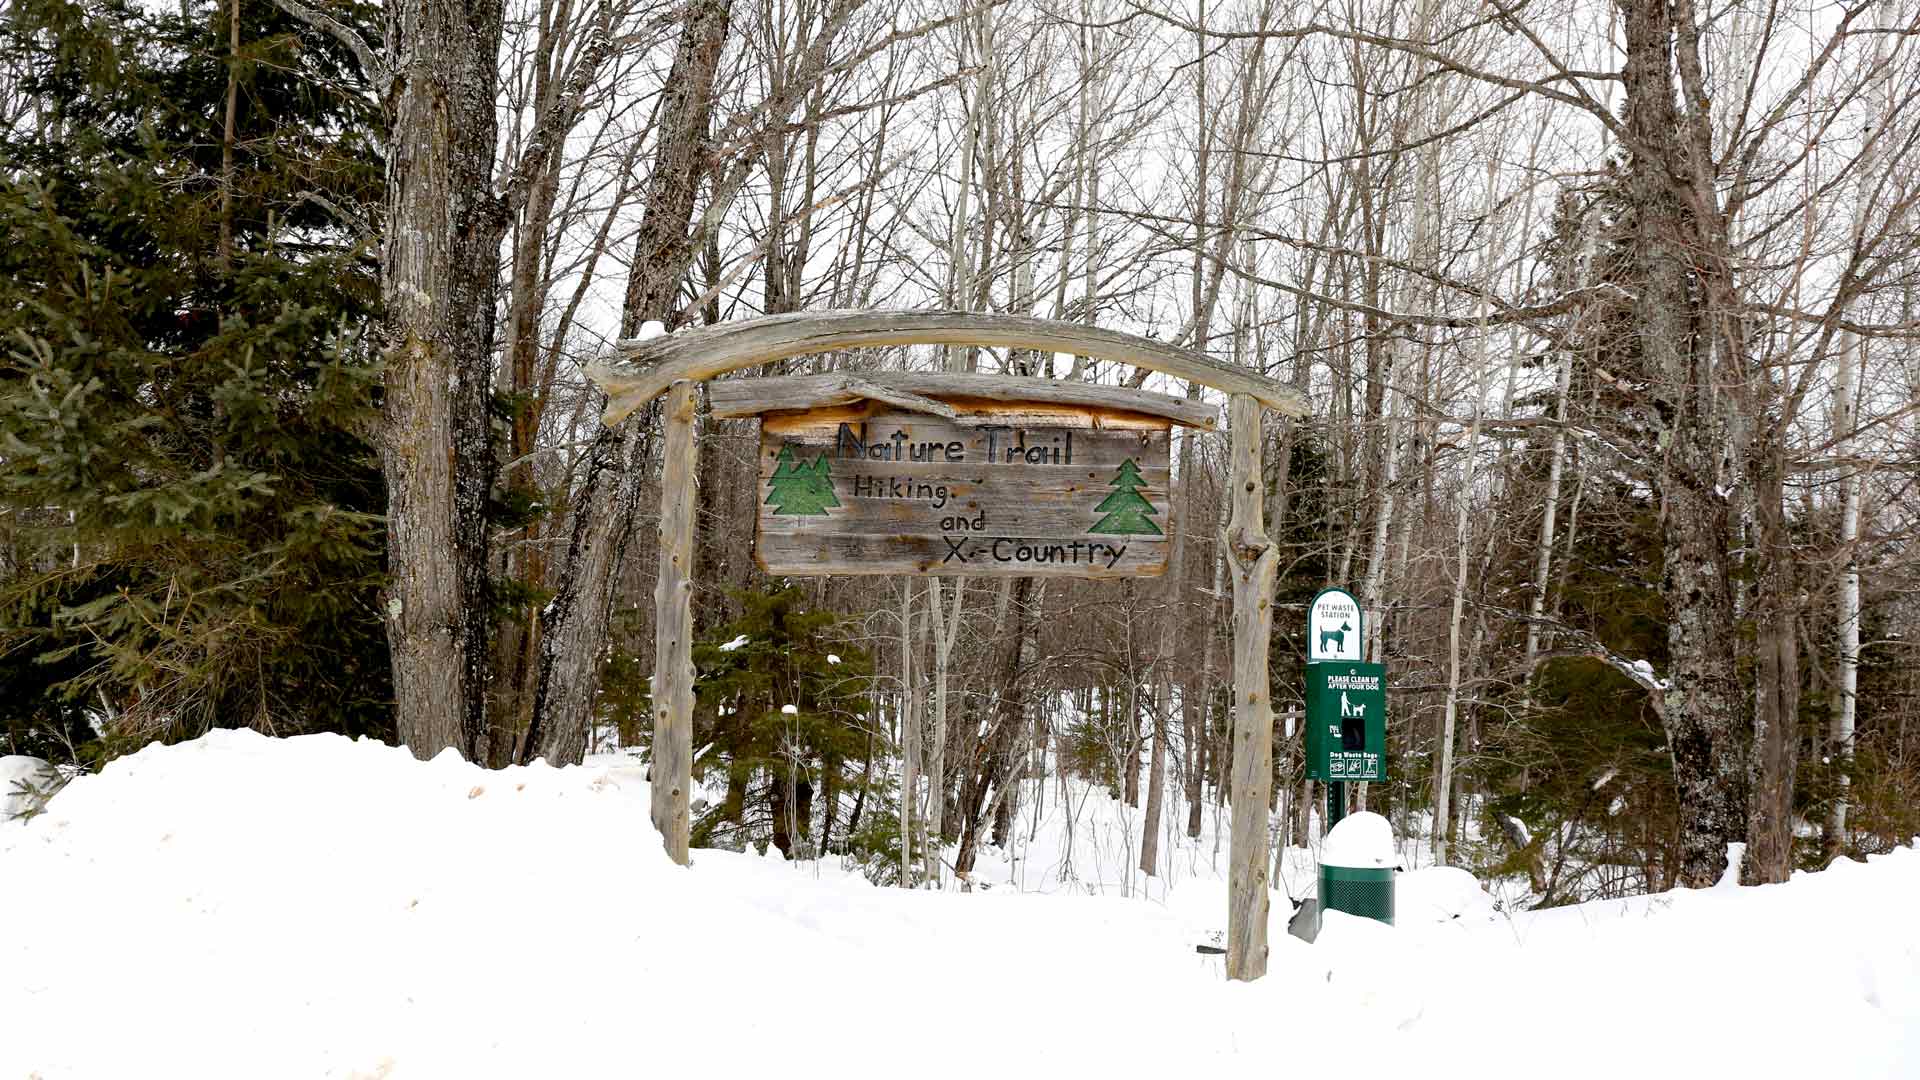 Rustic wooden sign displaying Nature Trail, Hiking and X-Country in front of snowy forest of Presque Isle Nature Trail in Vilas County, Wisconsin